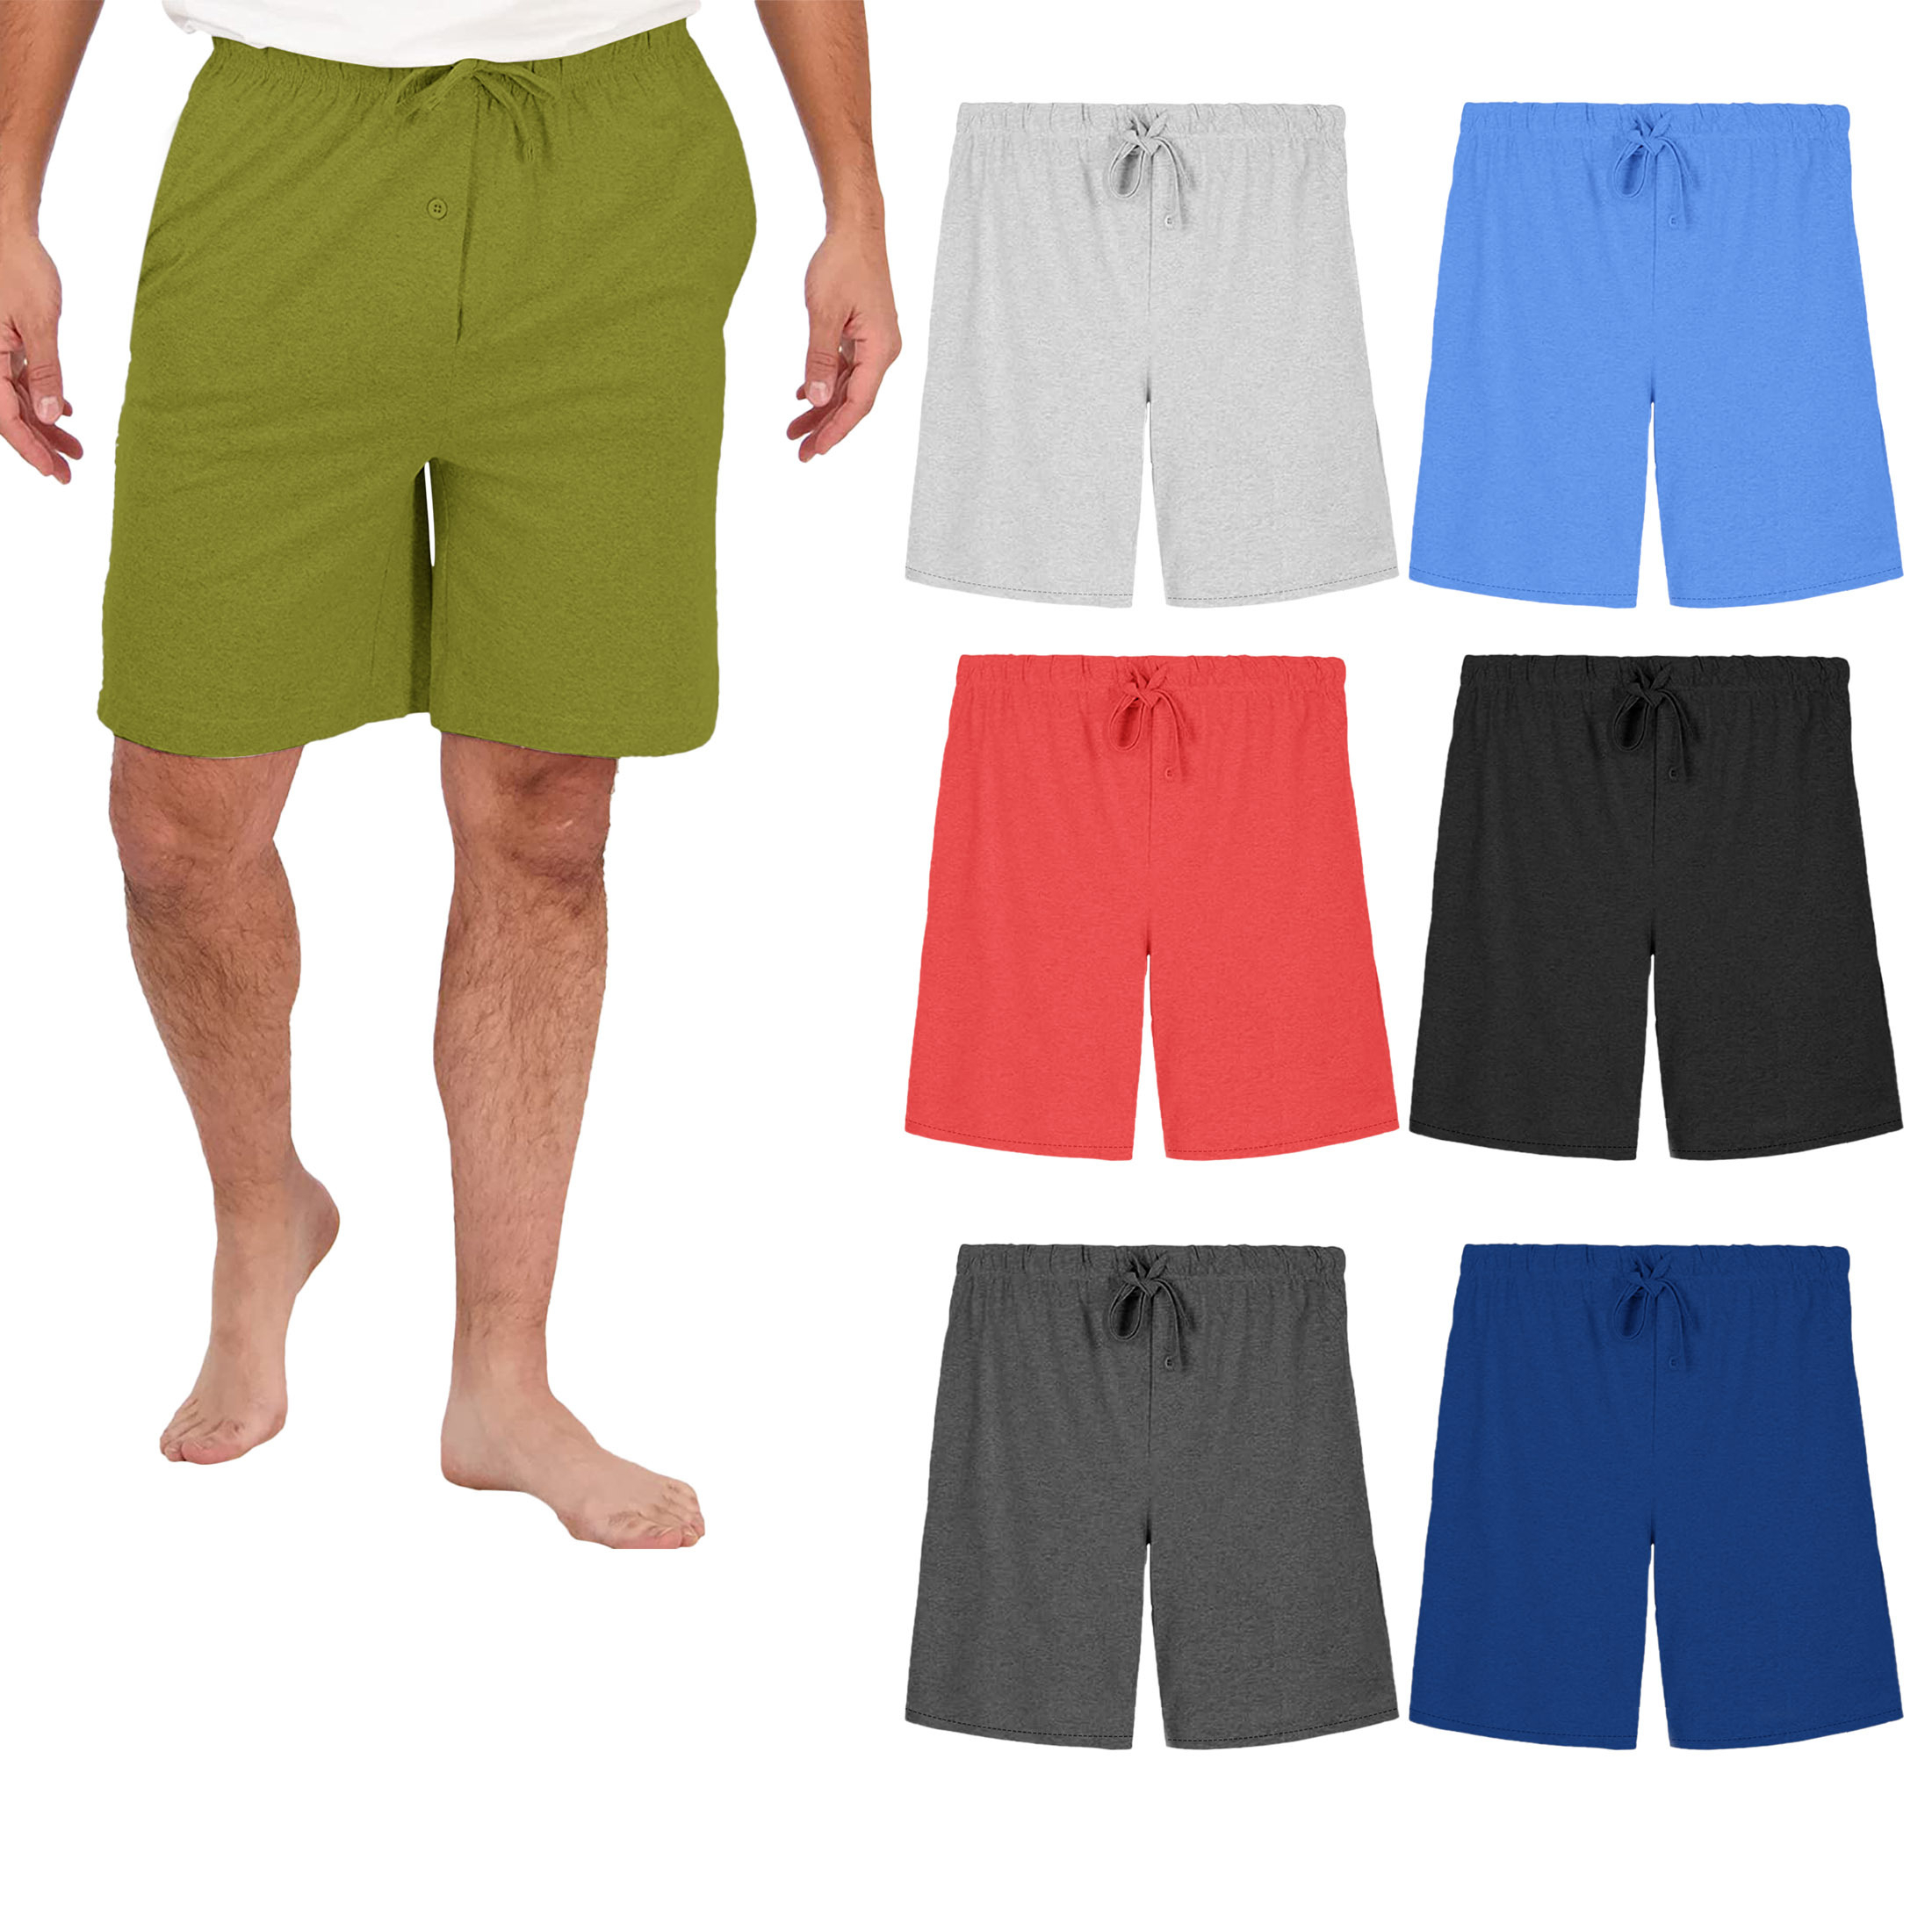 4-Pack Men's Solid Jersey-Knit Tech Shorts Soft Casual Athletic Relaxed Fit Lounge Performance Bottom Pants - XL